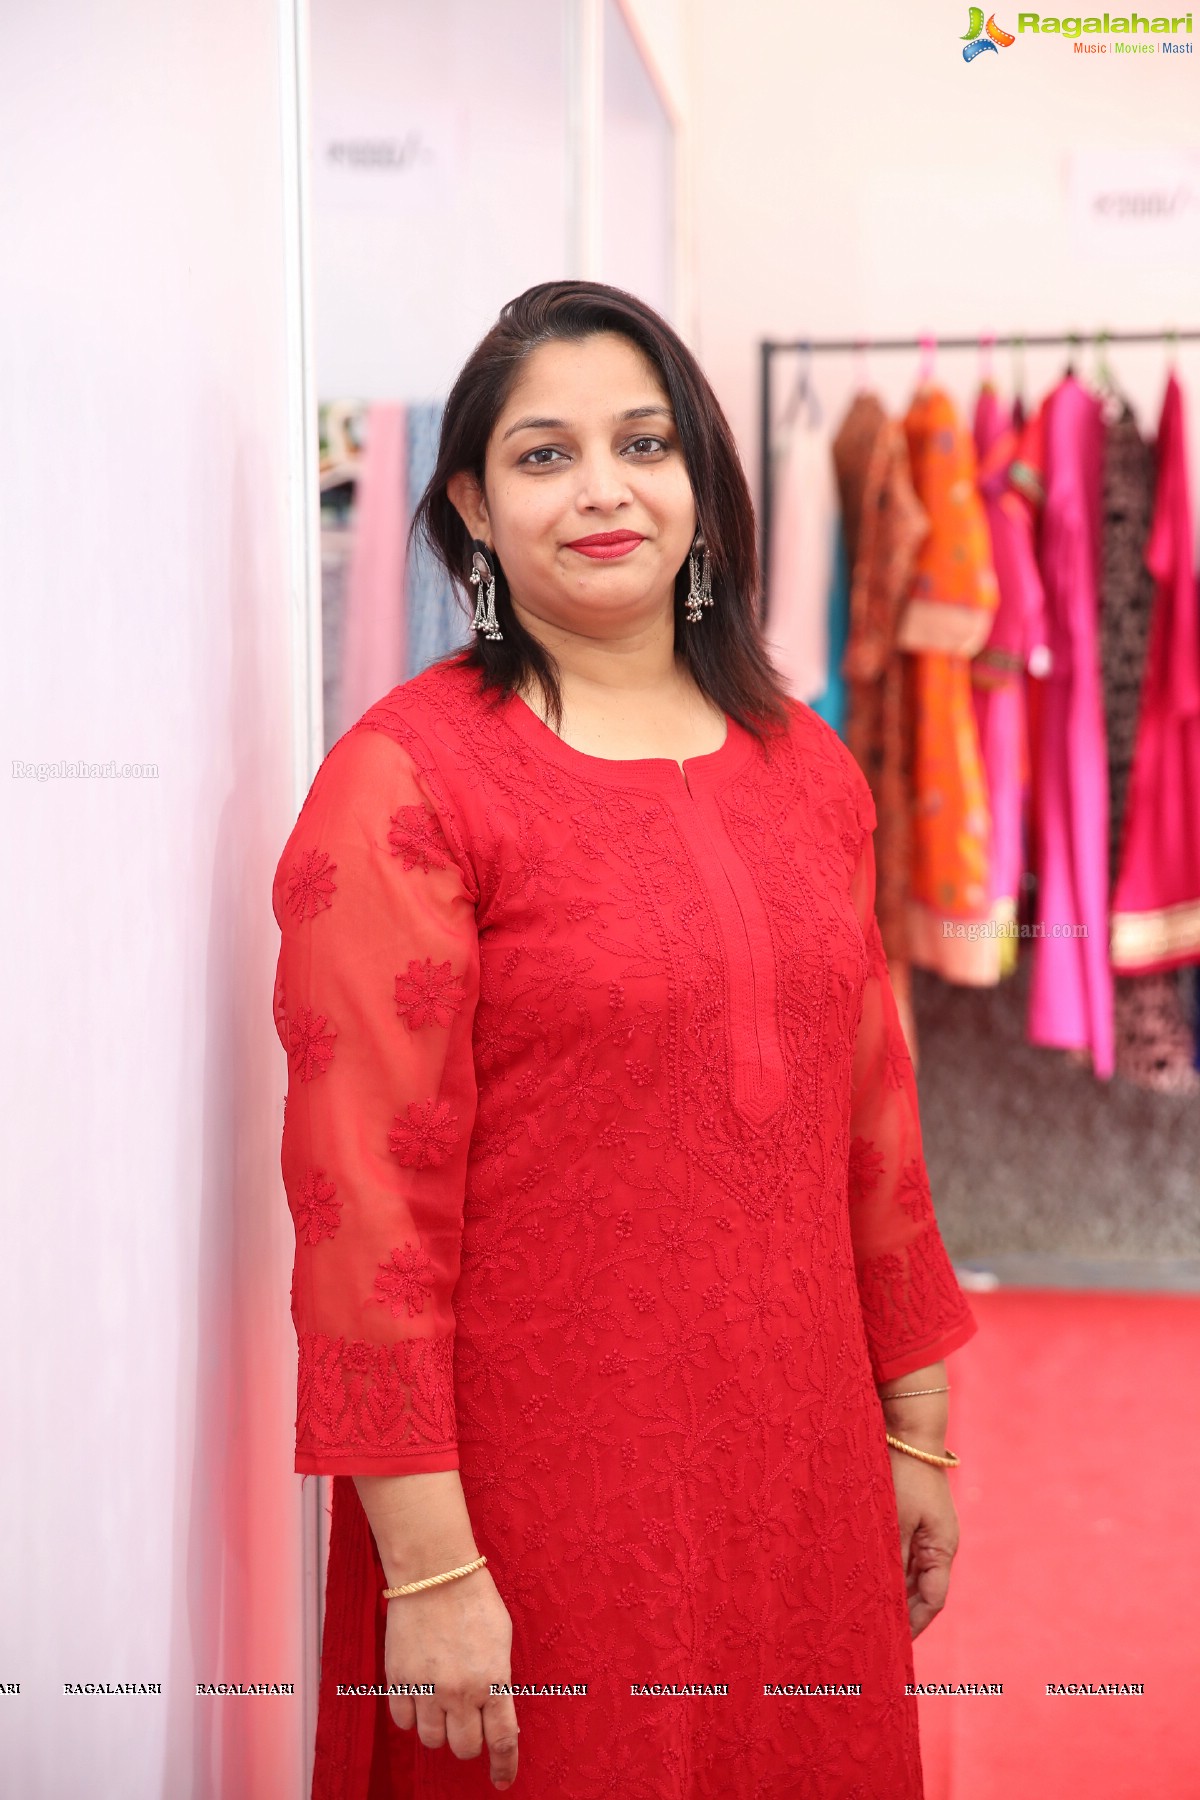 Lolo Fashion Harvest Exhibition & Sale Begins at Country Club Begumpet